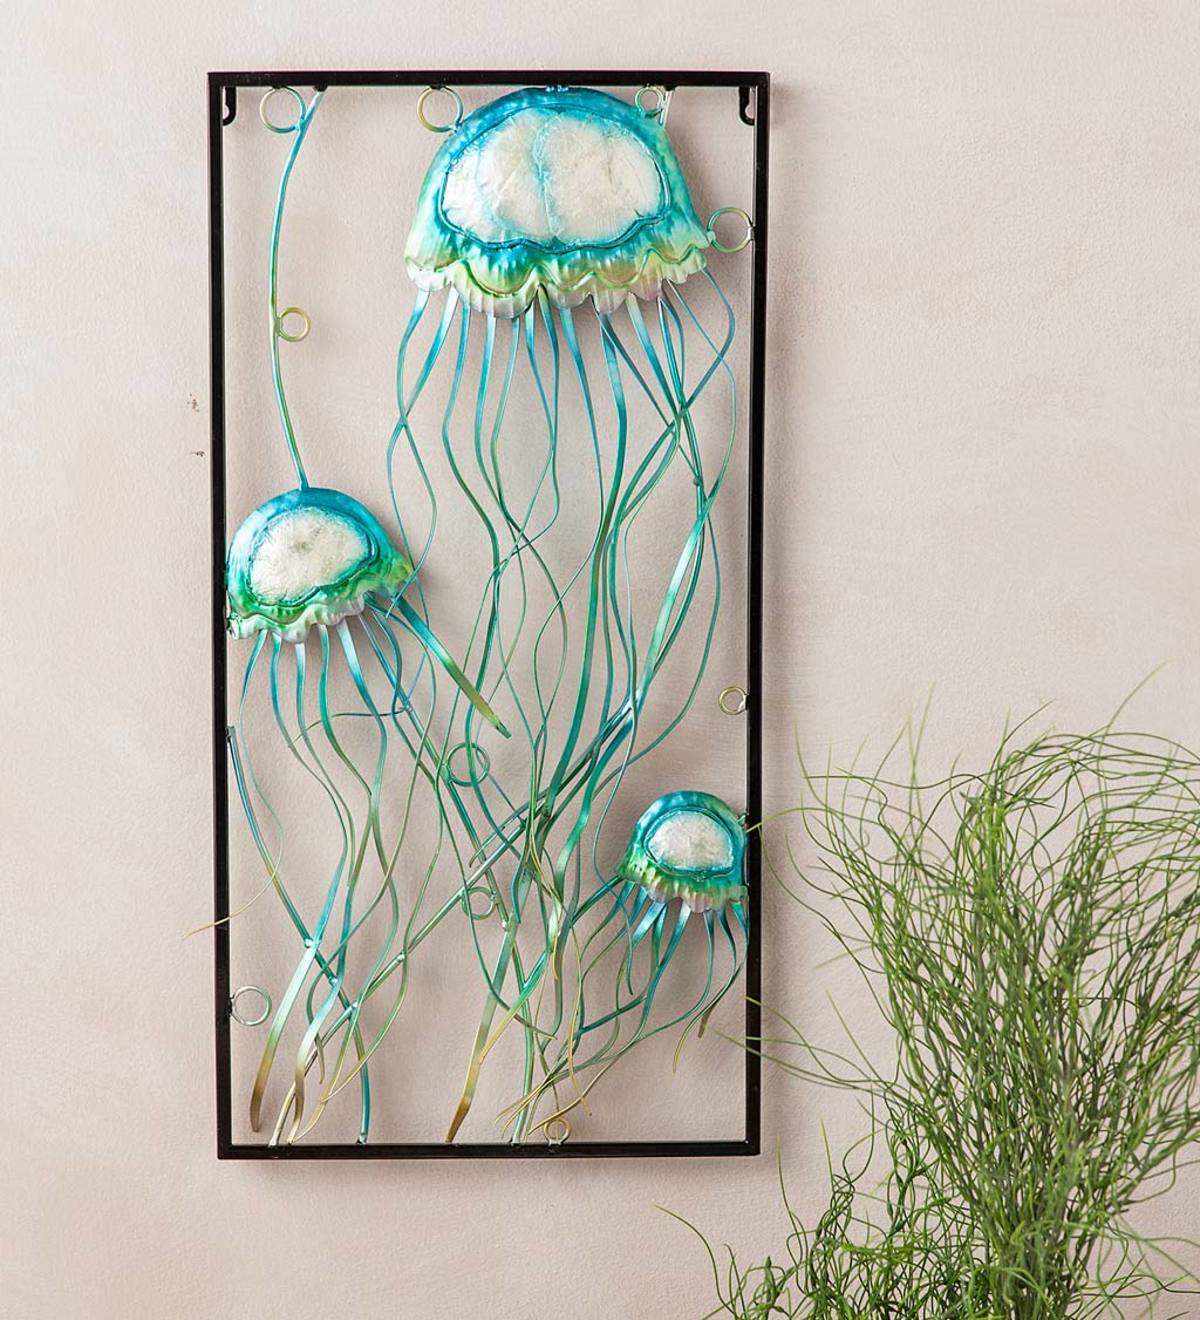 Handcrafted Metal Jellyfish Wall Art with Capiz Accents